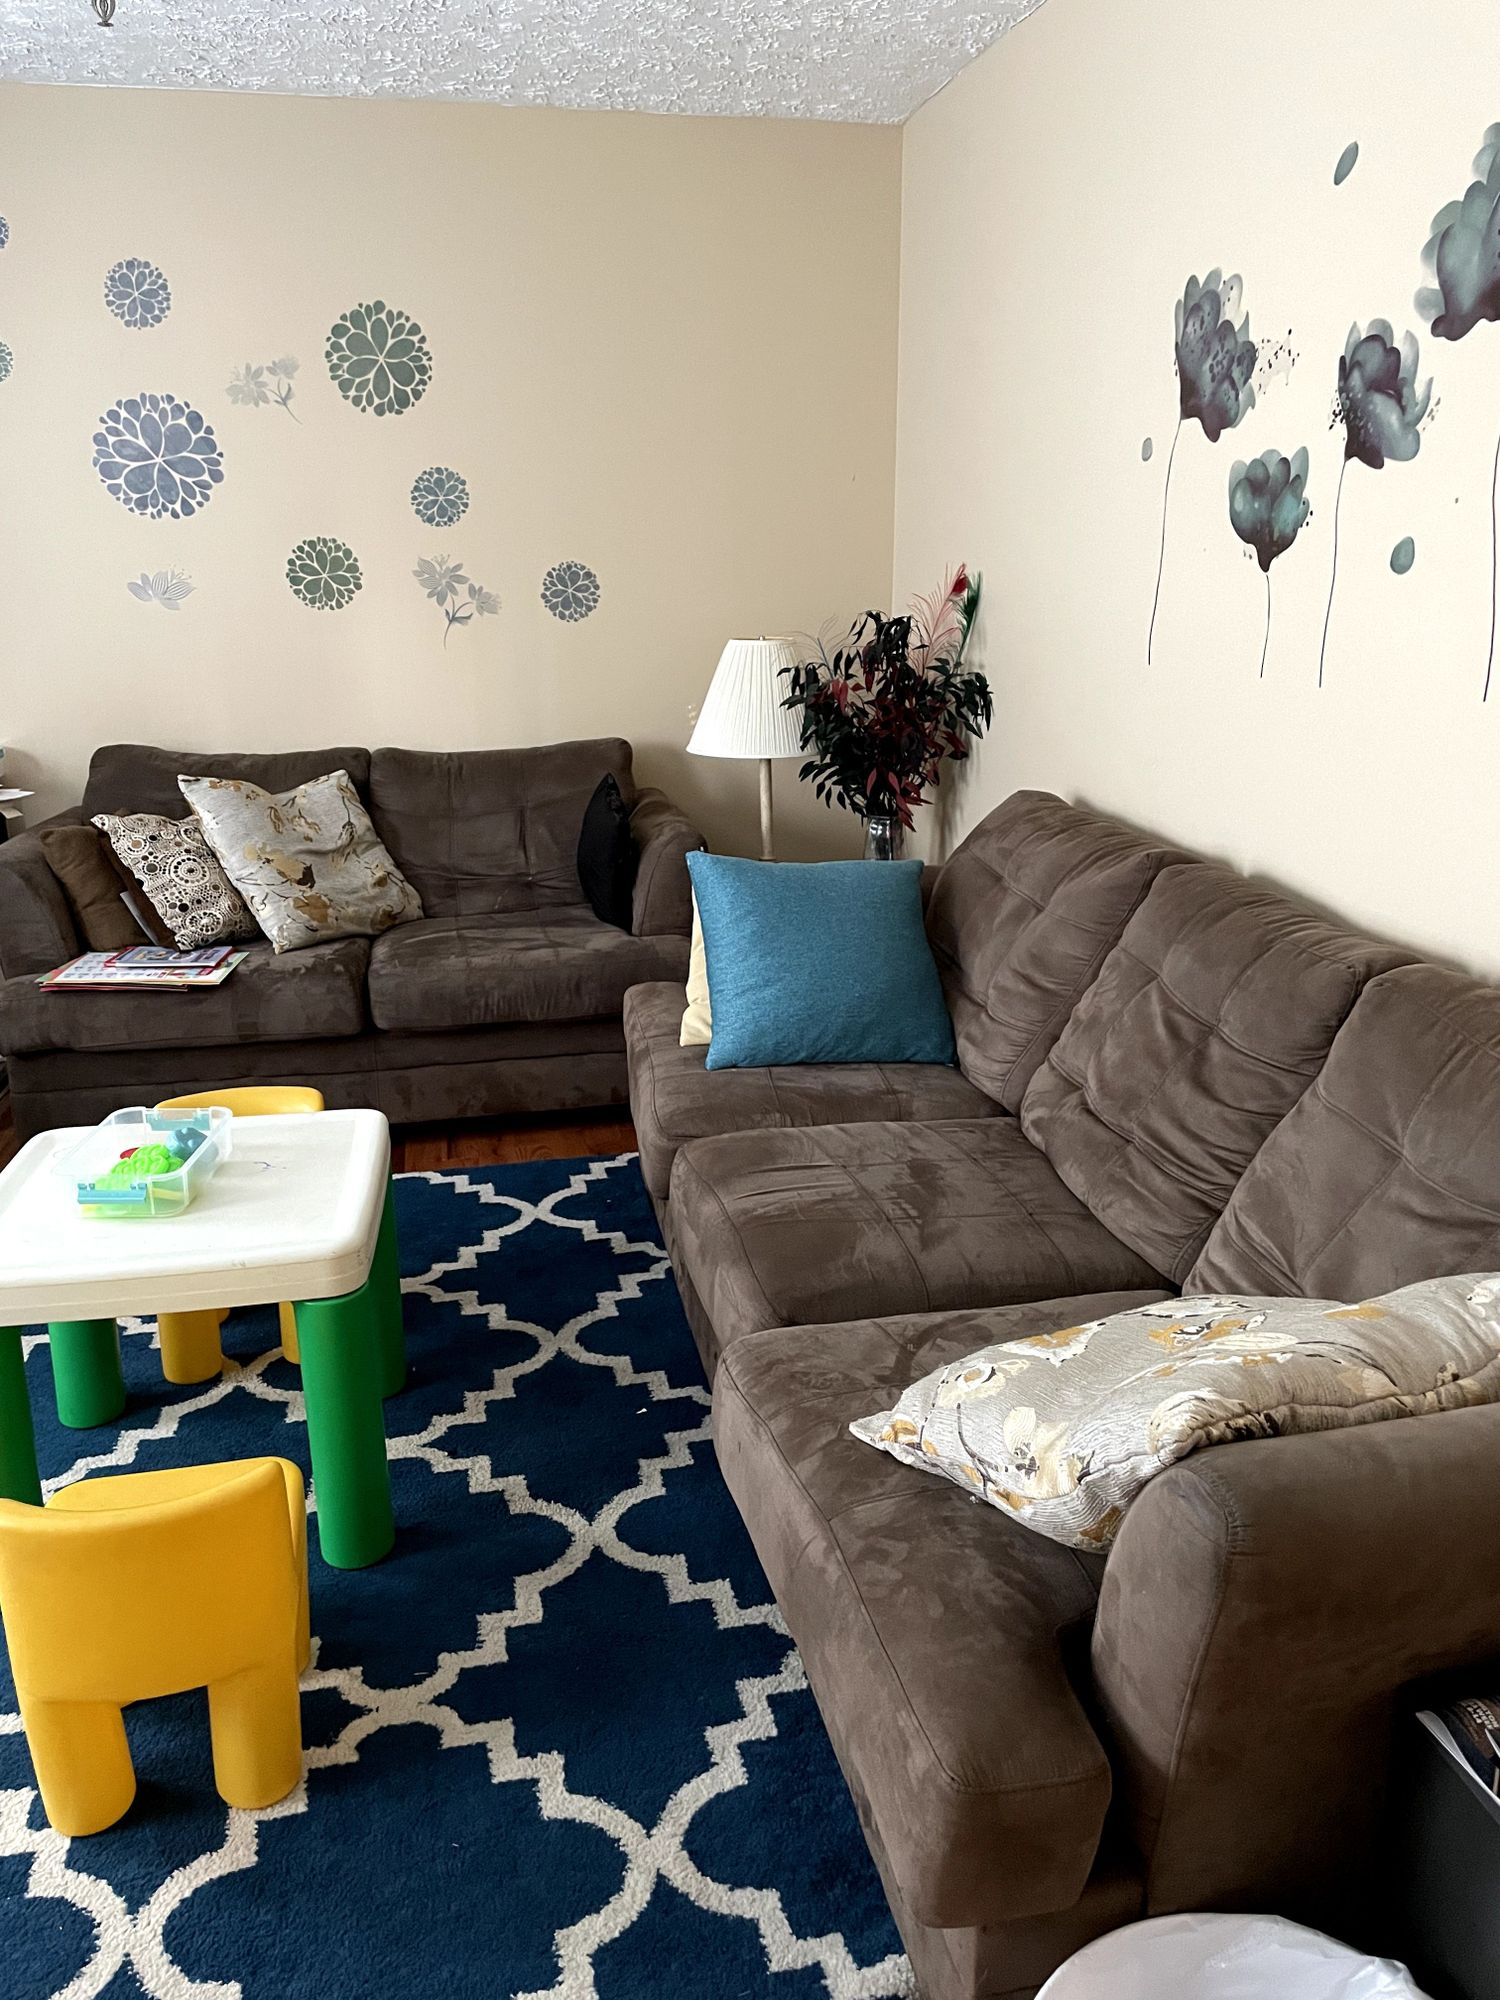 Gallery Photo of Nicole's office is comfortable and welcoming couples and kids!